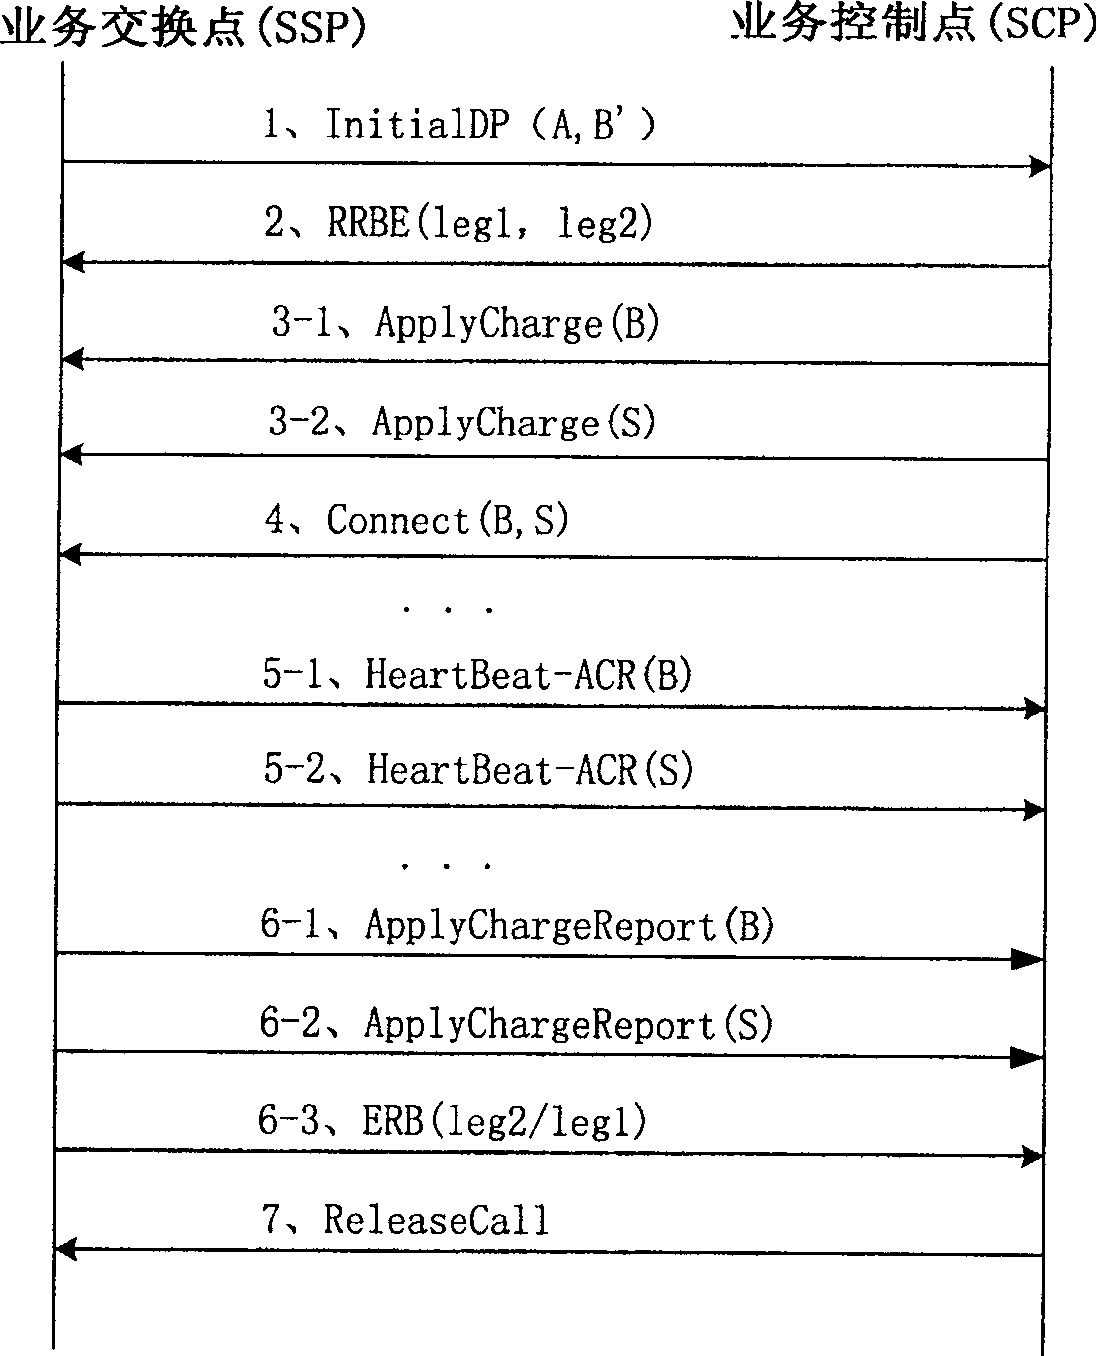 Method for realizing supporting simultaneous ringing in personal communication service